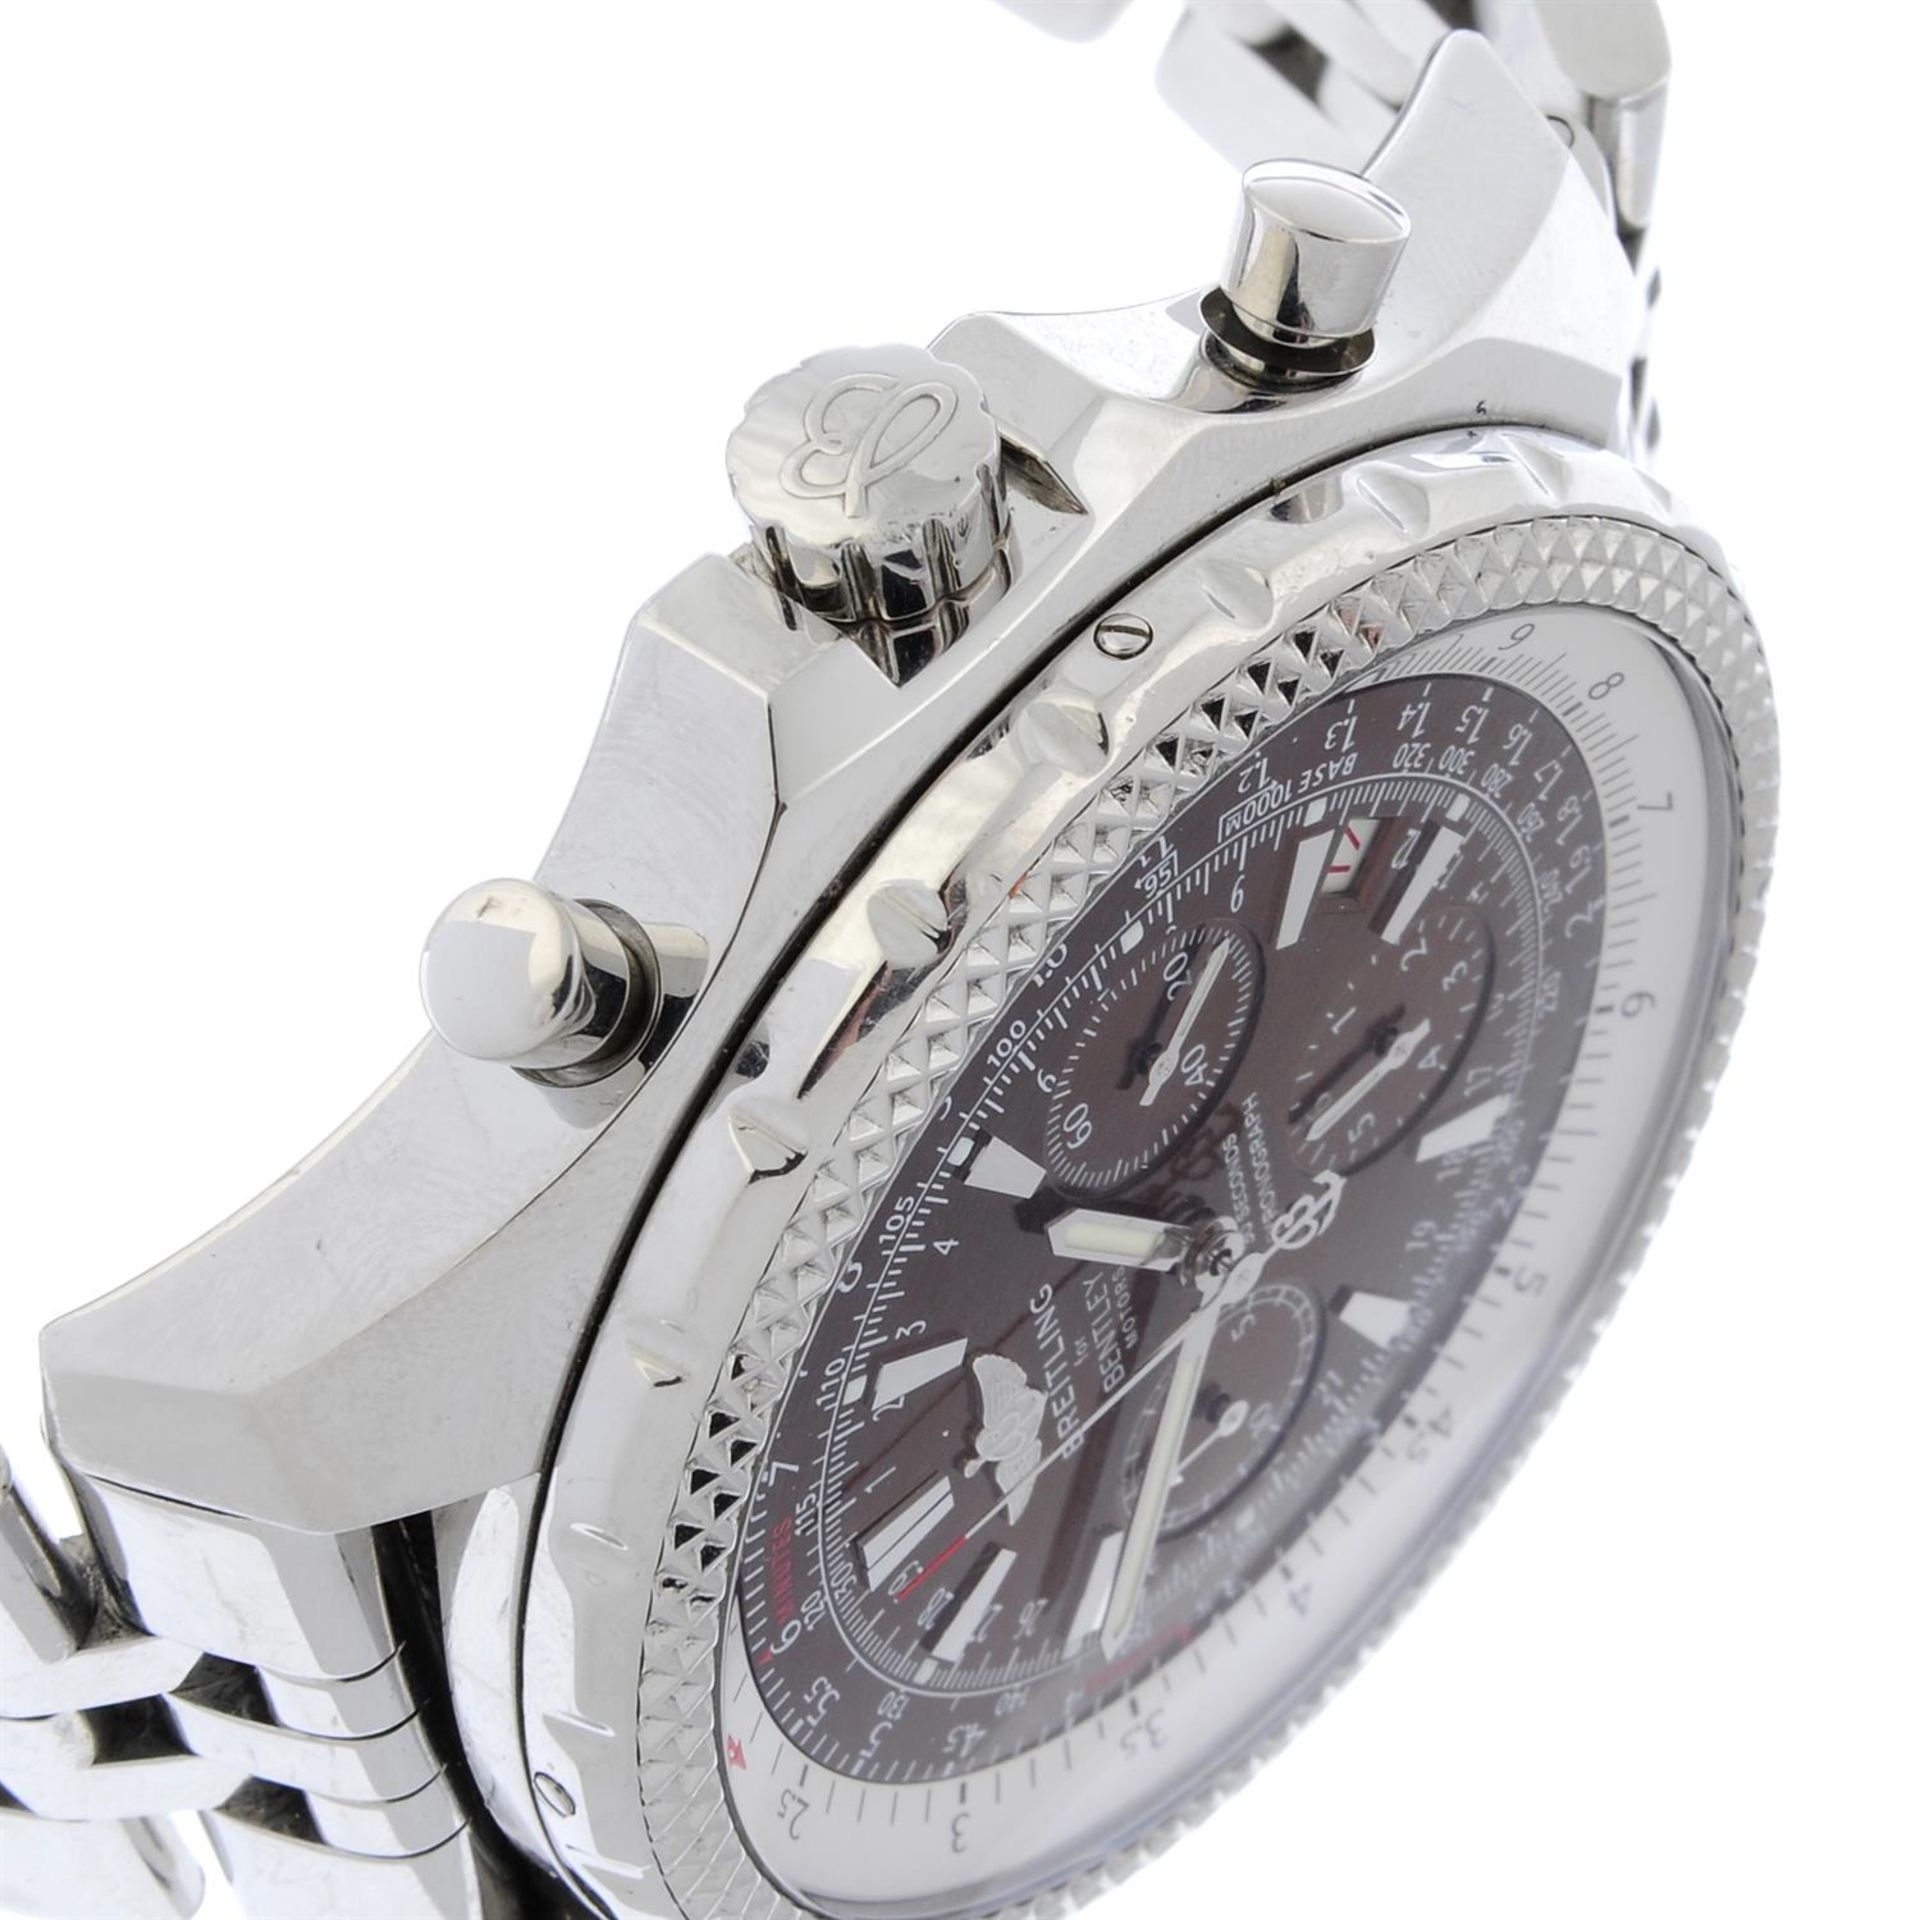 BREITLING - a stainless steel Breitling for Bentley chronograph bracelet watch, 49mm. - Image 3 of 6